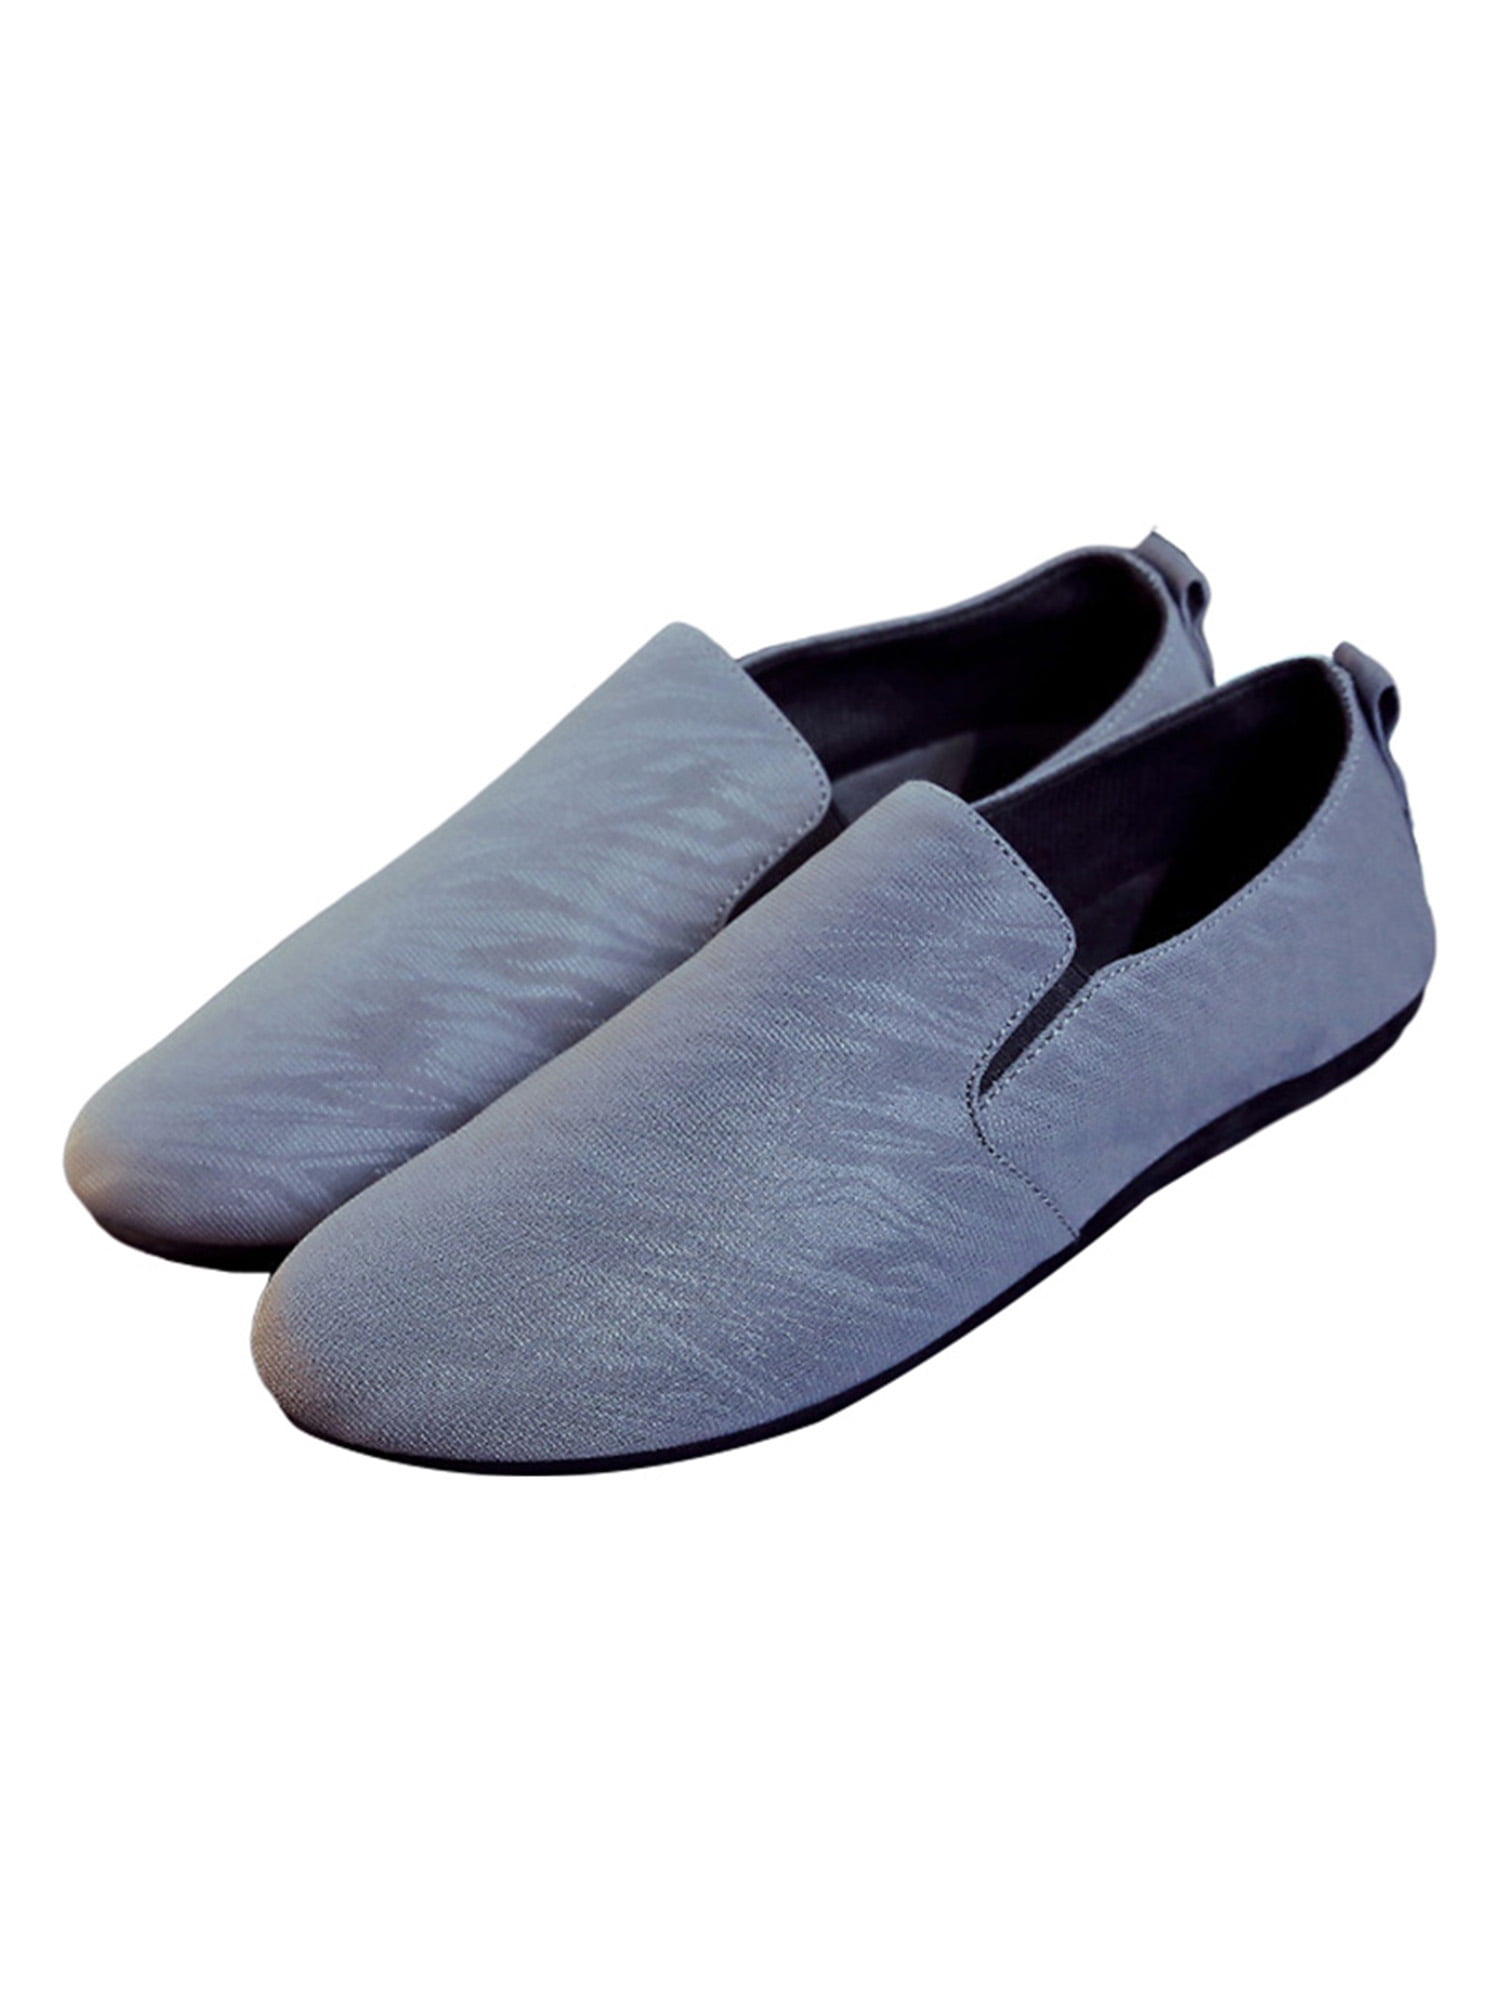 Men's Slip On Canvas Loafers Driving Moccasin Shoes Flats Sneakers Breathable 